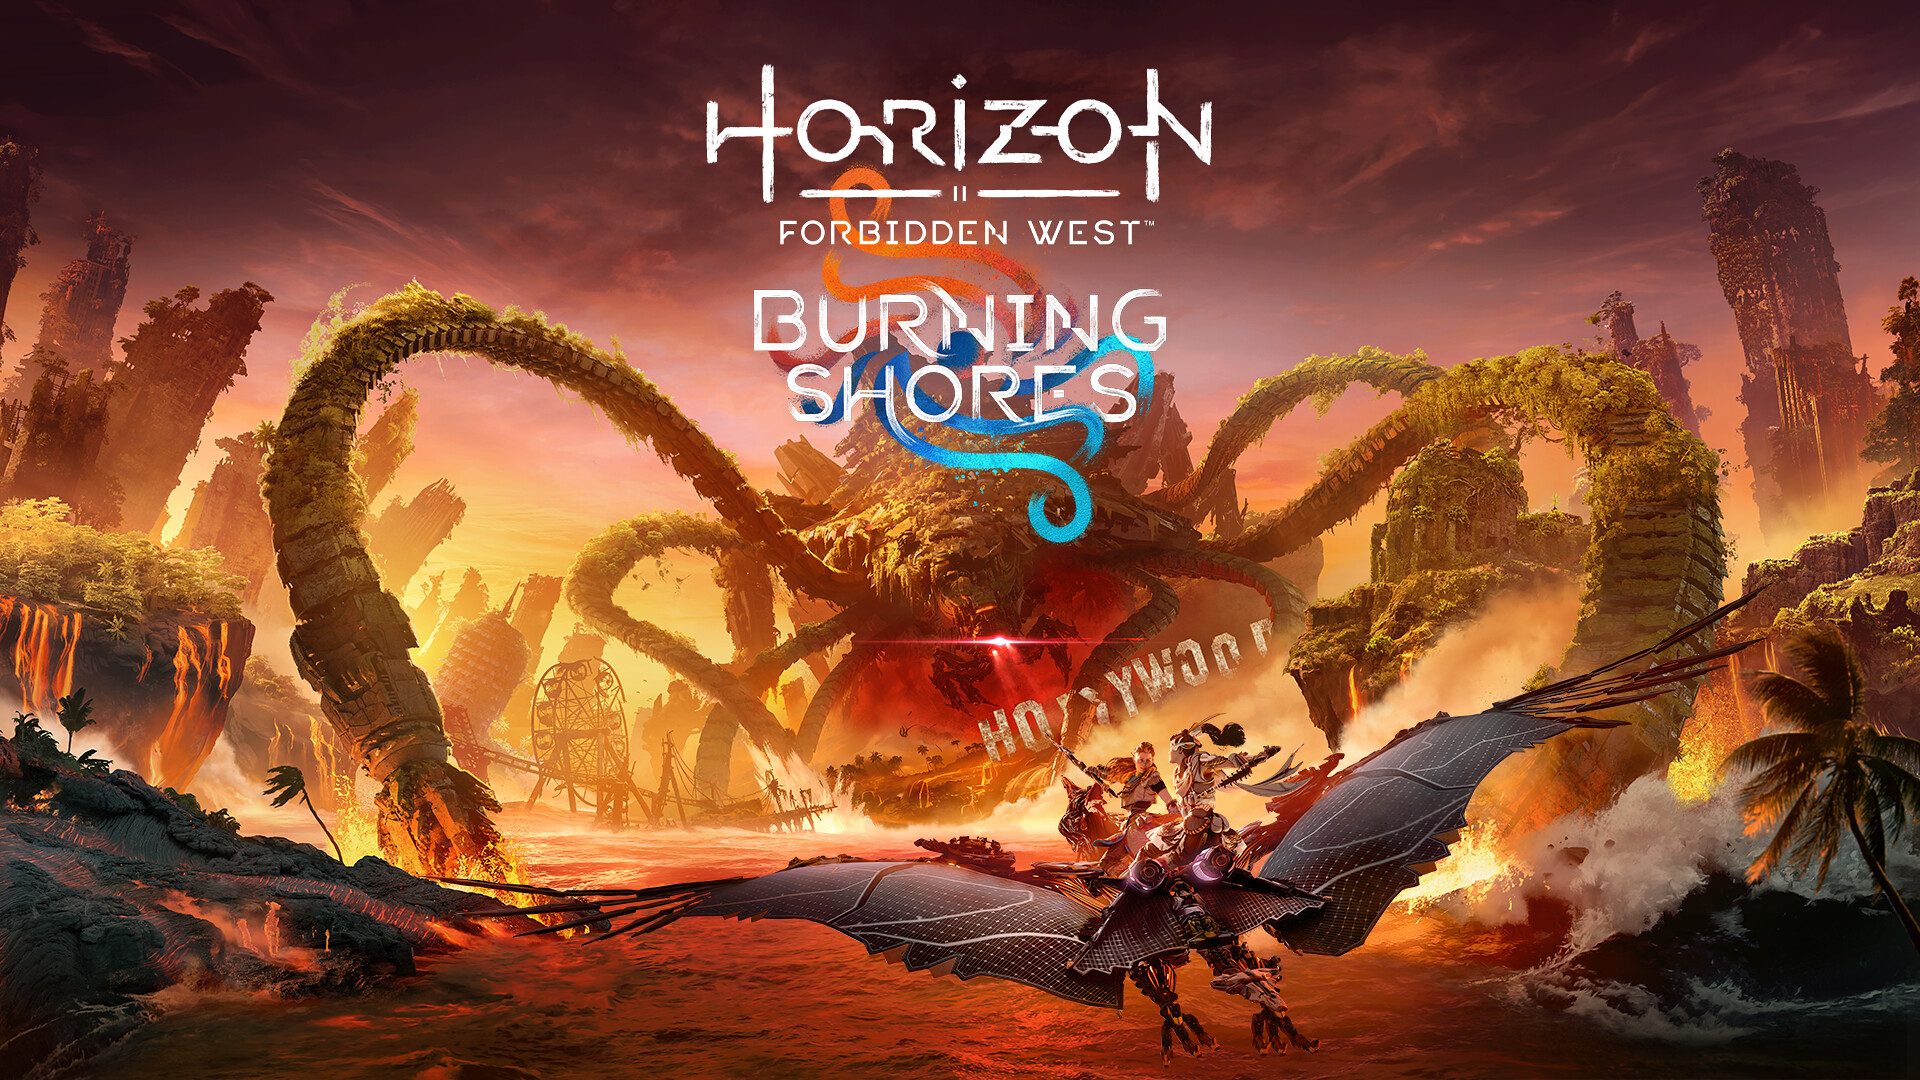 Horizon Forbidden West: Burning Shores is available to pre-order today, pre-order bonuses detailed